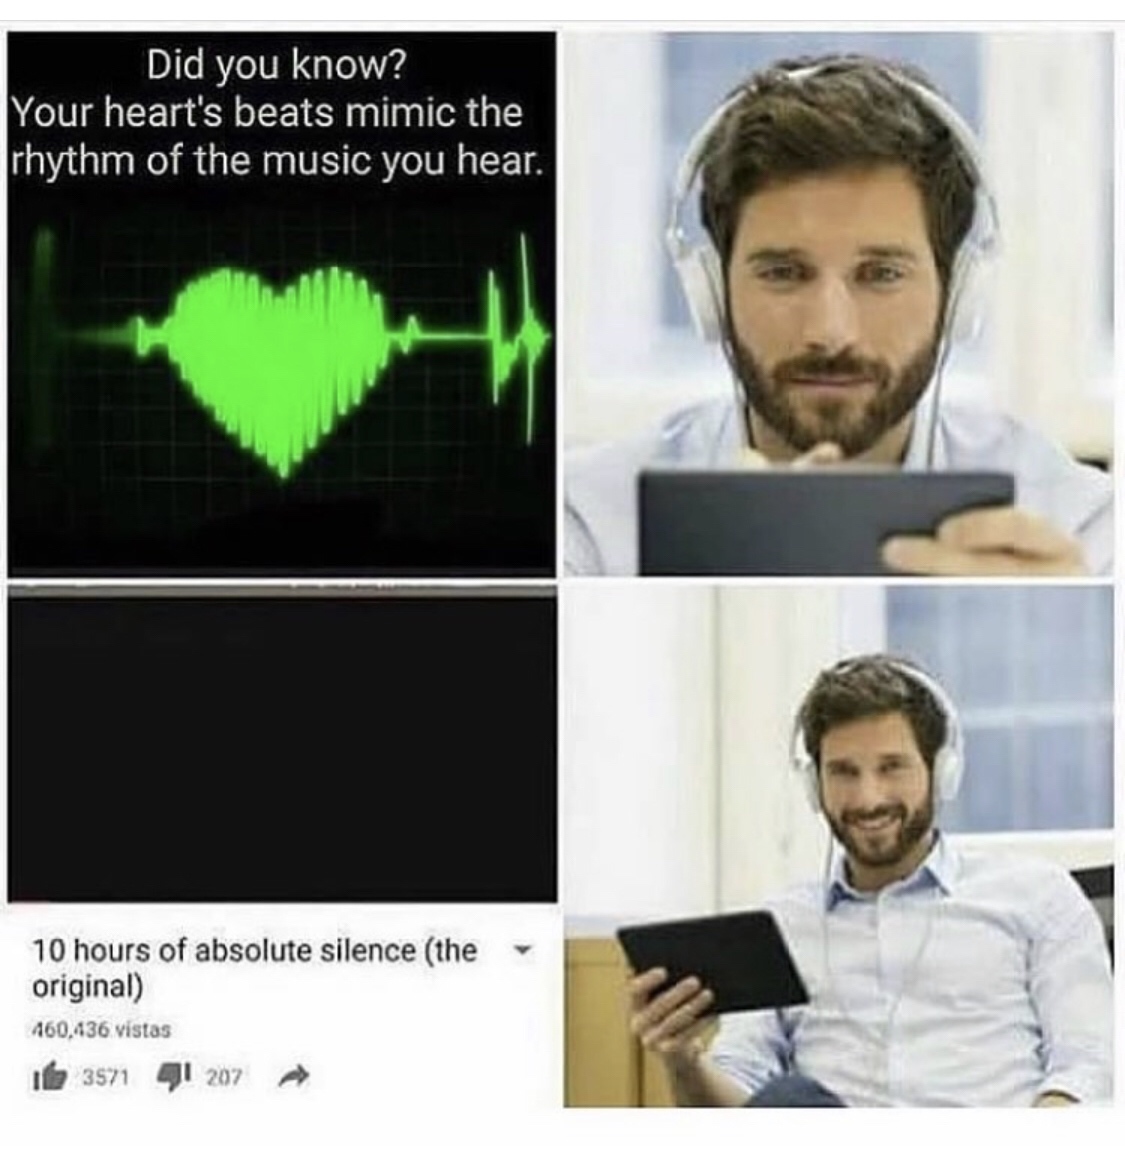 10 hours of absolute silence meme - Did you know? Your heart's beats mimic the rhythm of the music you hear. 10 hours of absolute silence the original 460,436 vistas I 3571 41 207